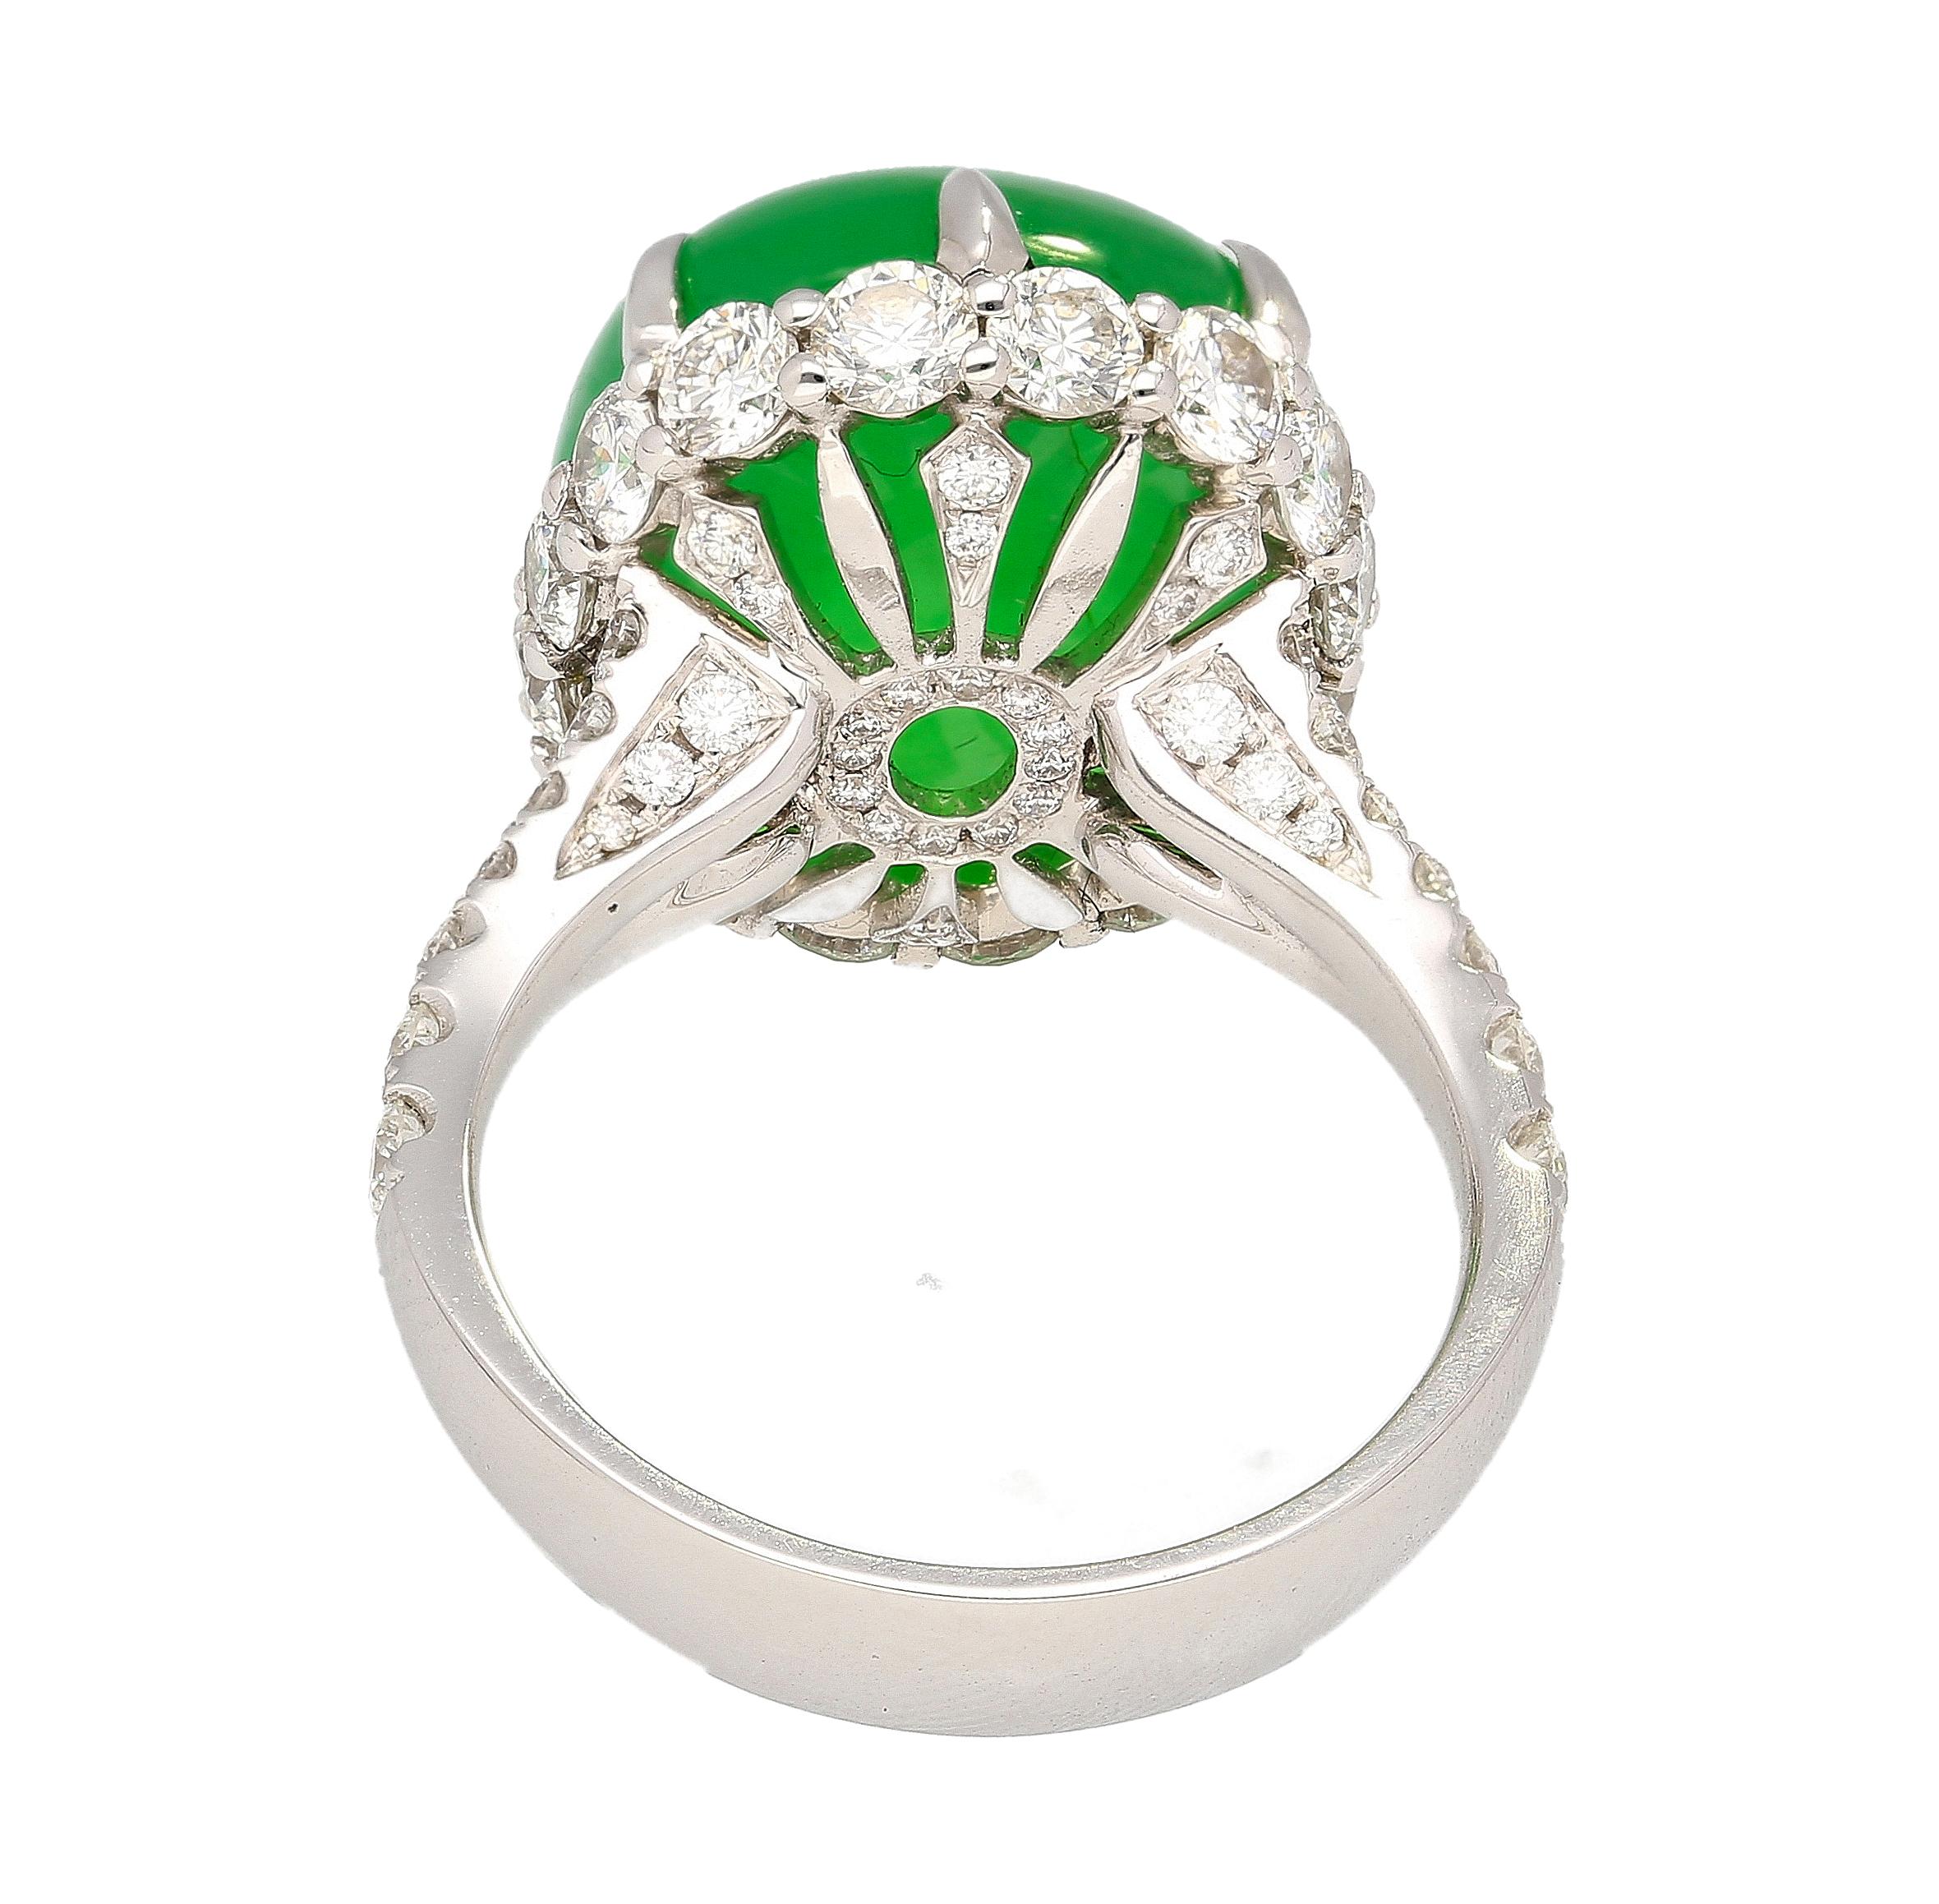 17.86 Carat Oval Cut Jadeite Jade and Diamond Ring in 18K White Gold For Sale 1